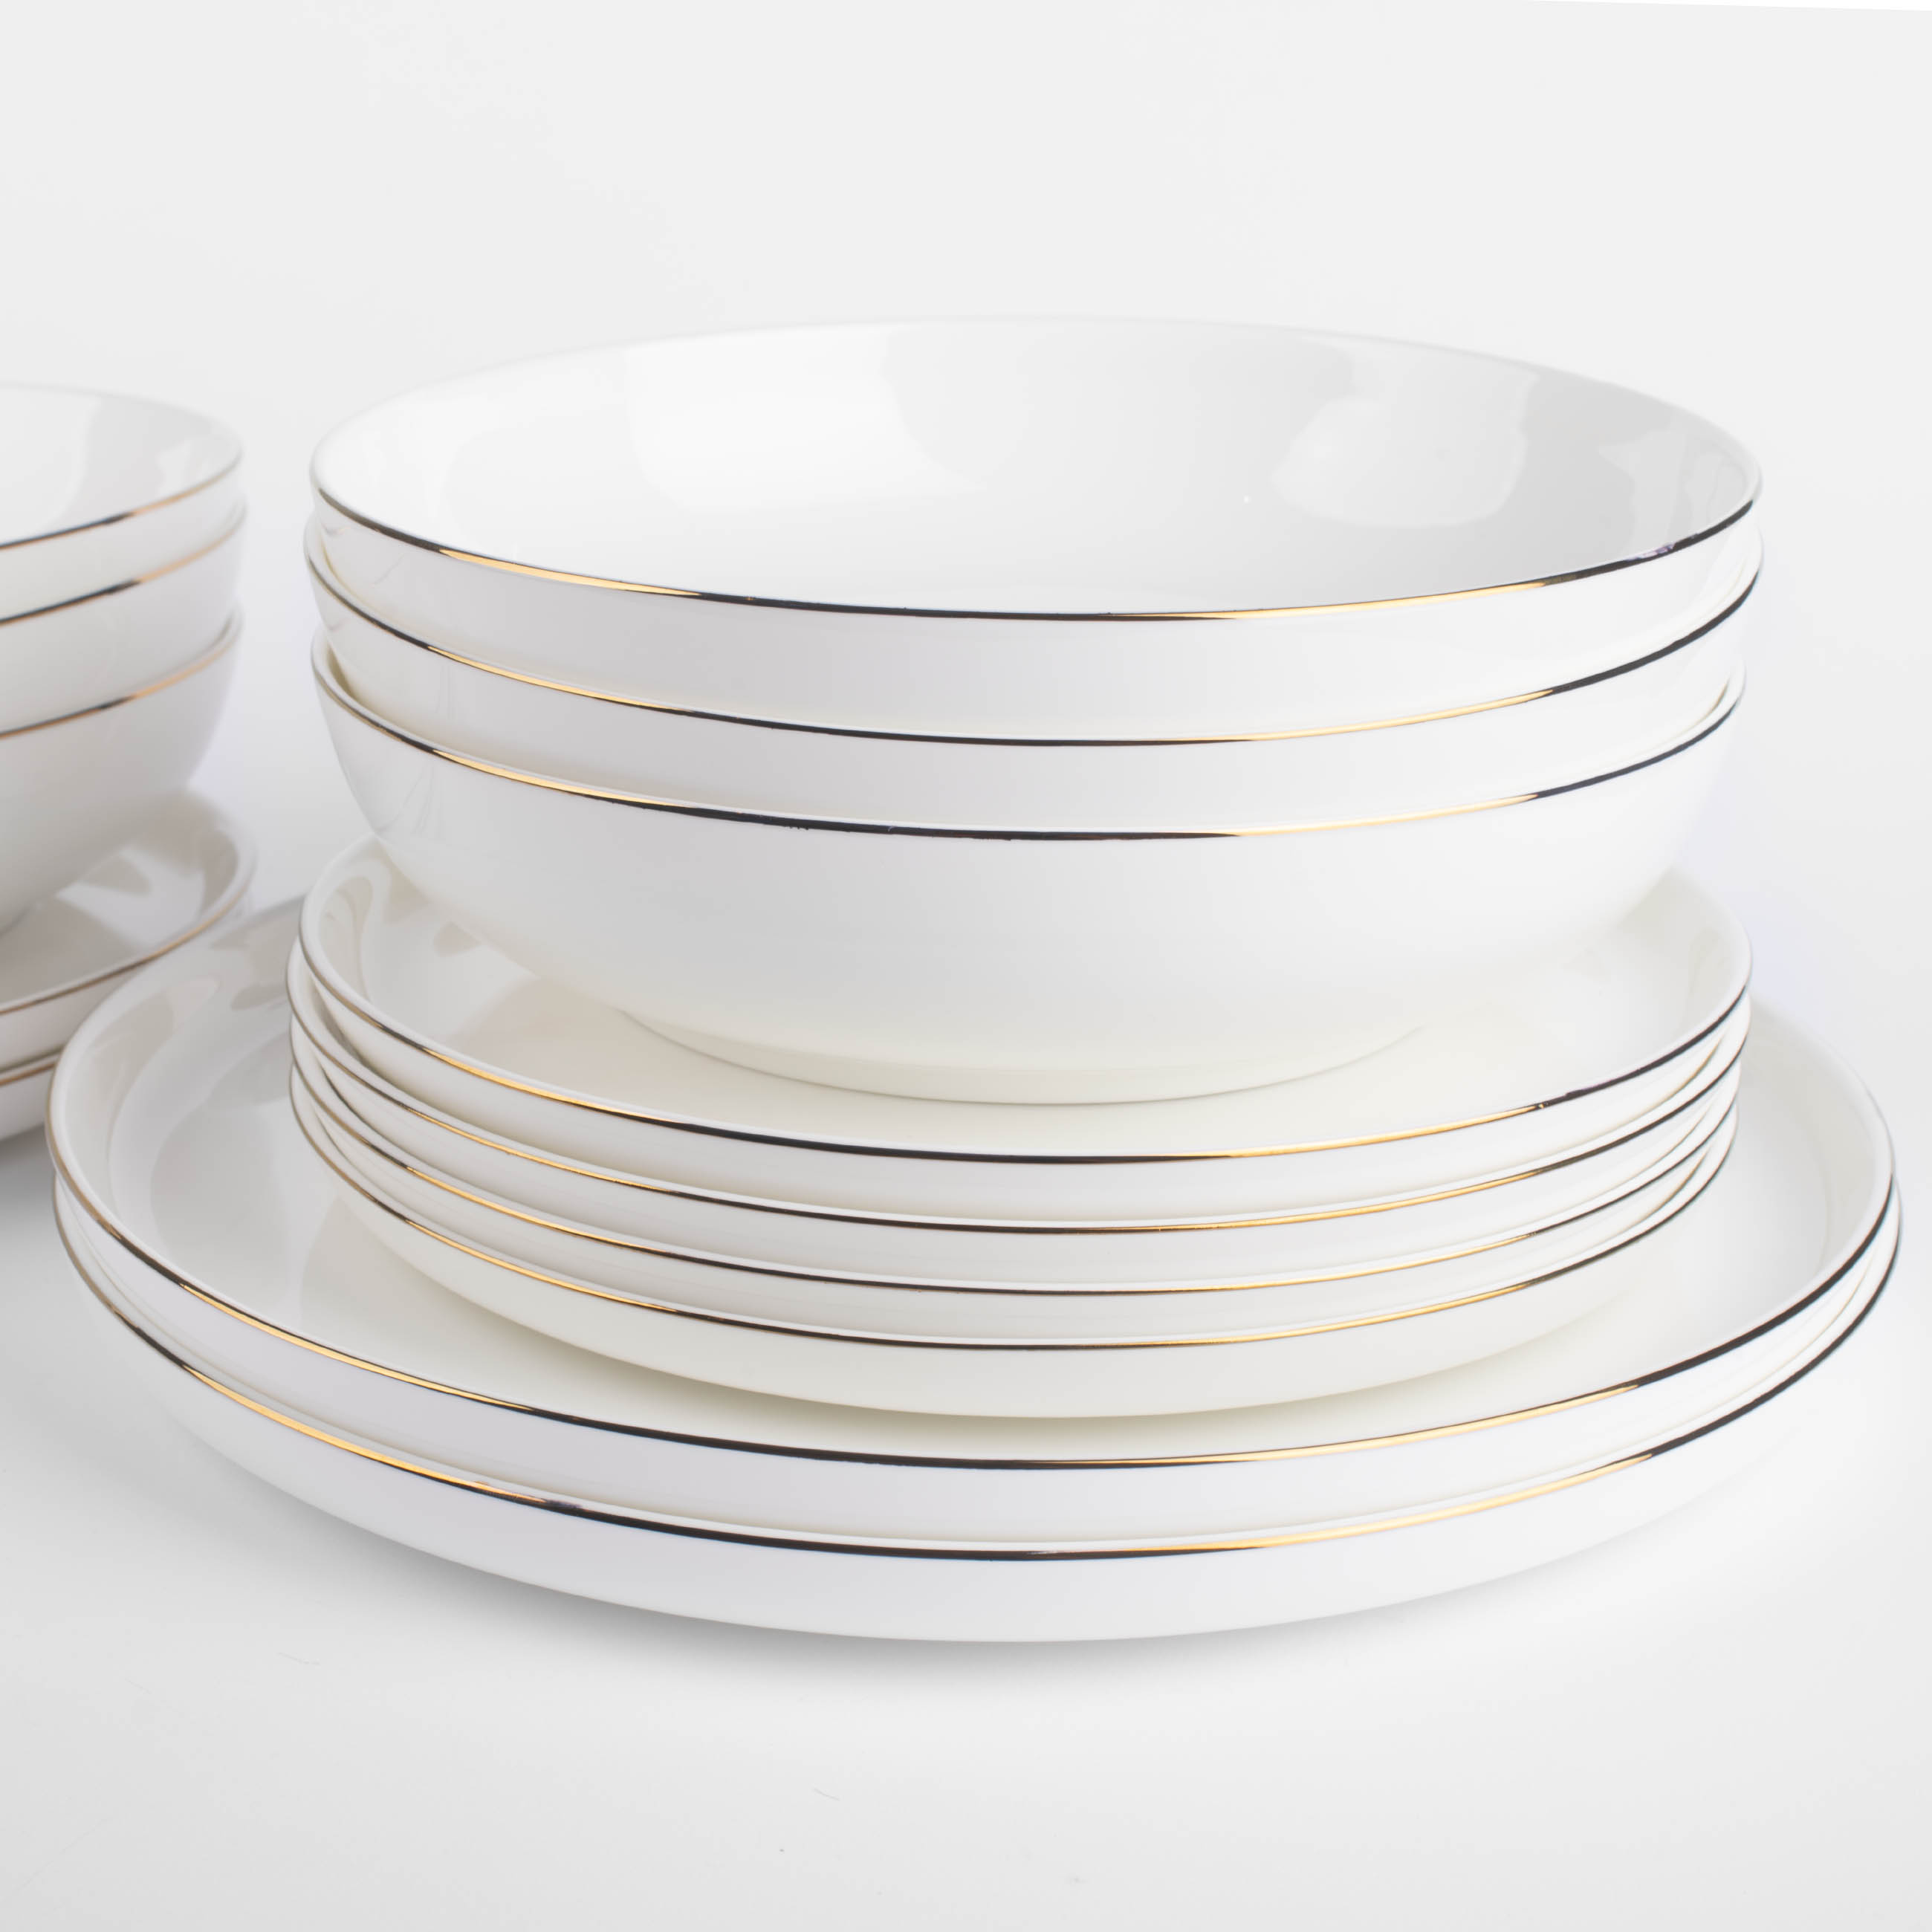 Dining set, 6 pers, 18 items, porcelain F, white, Ideal gold изображение № 6